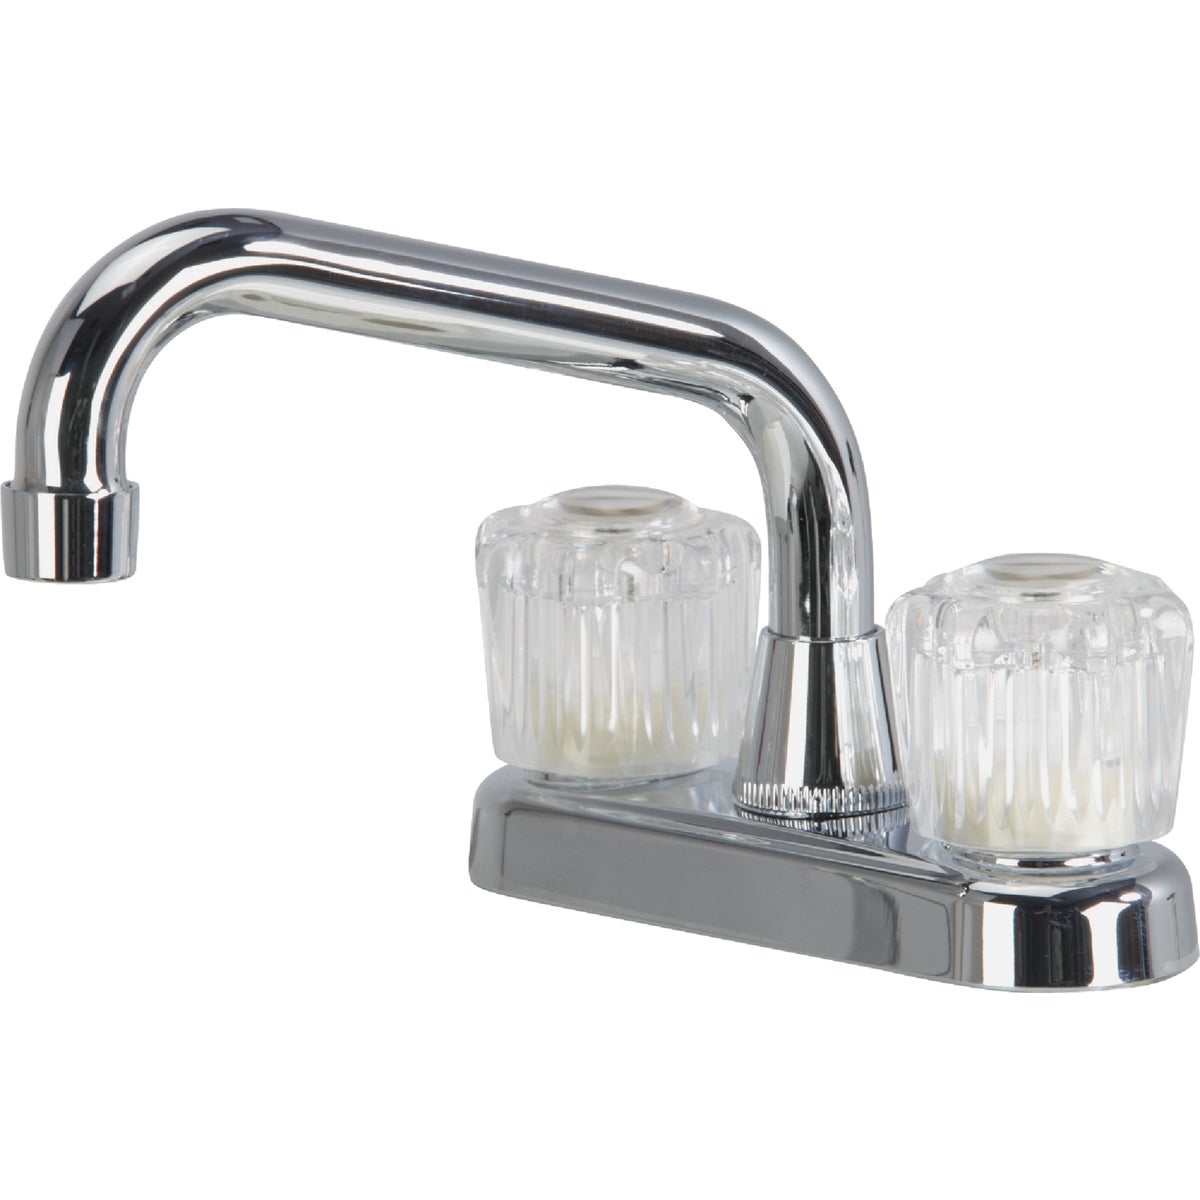 Item 459488, 2-handle nonmetallic laundry faucet with acrylic round handles. 2.